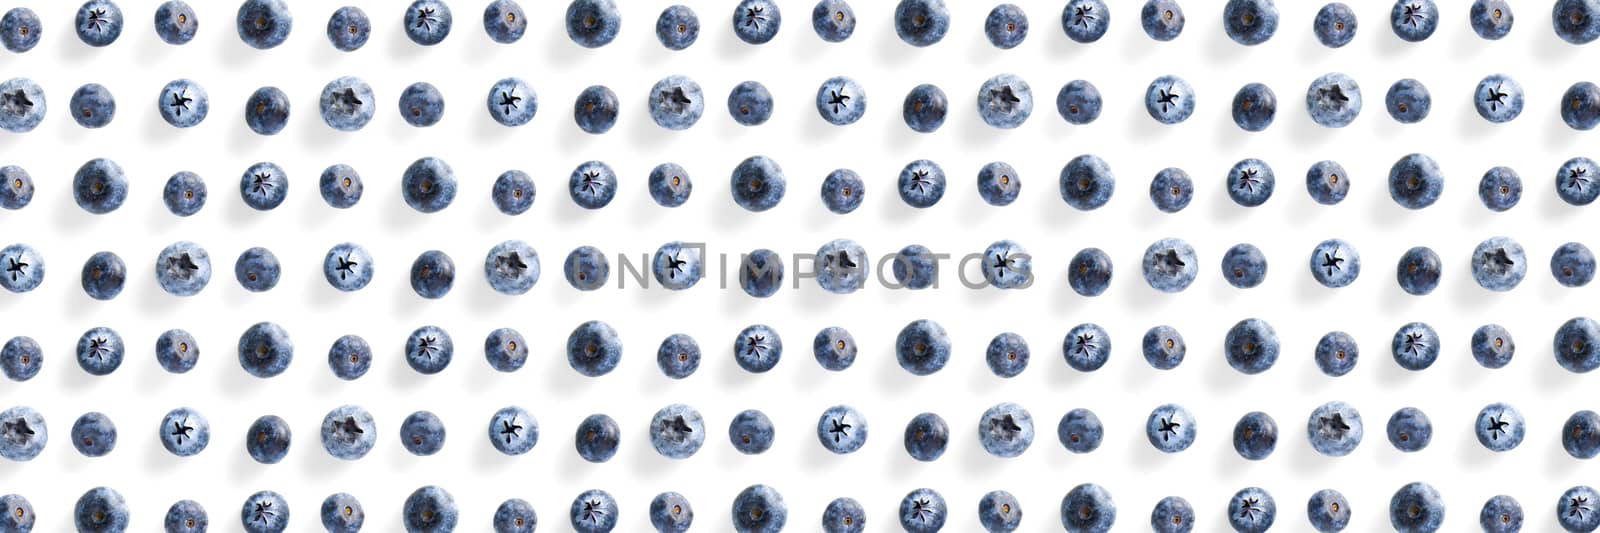 Background of Freshly picked blueberries on white backdrop. by PhotoTime